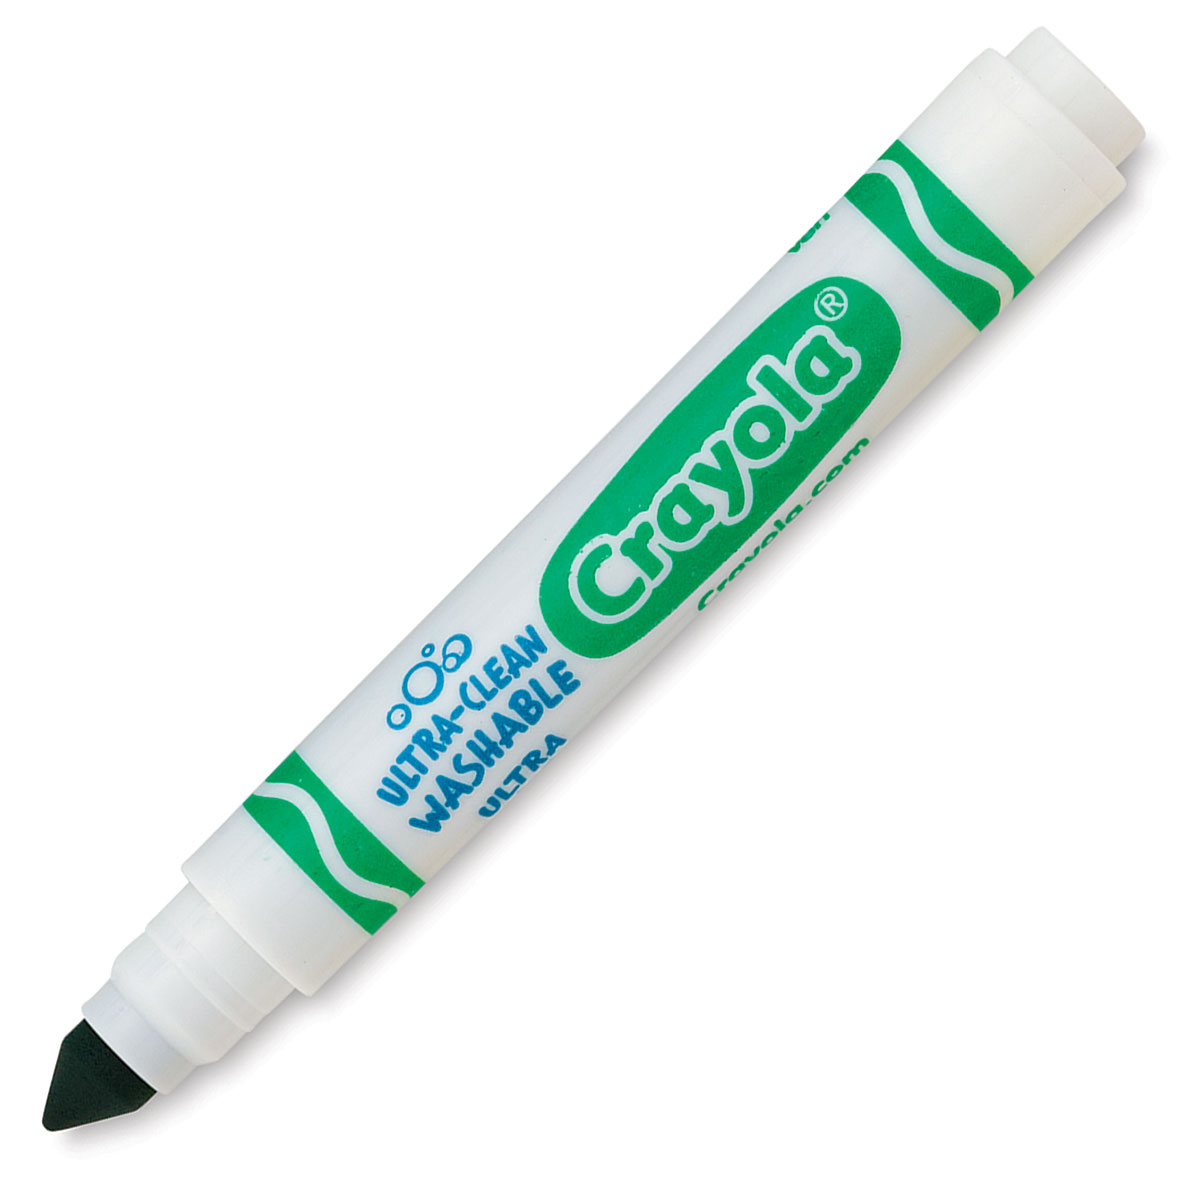 Crayola Ultra-Clean Washable Marker Set - Classic Colors, Thin